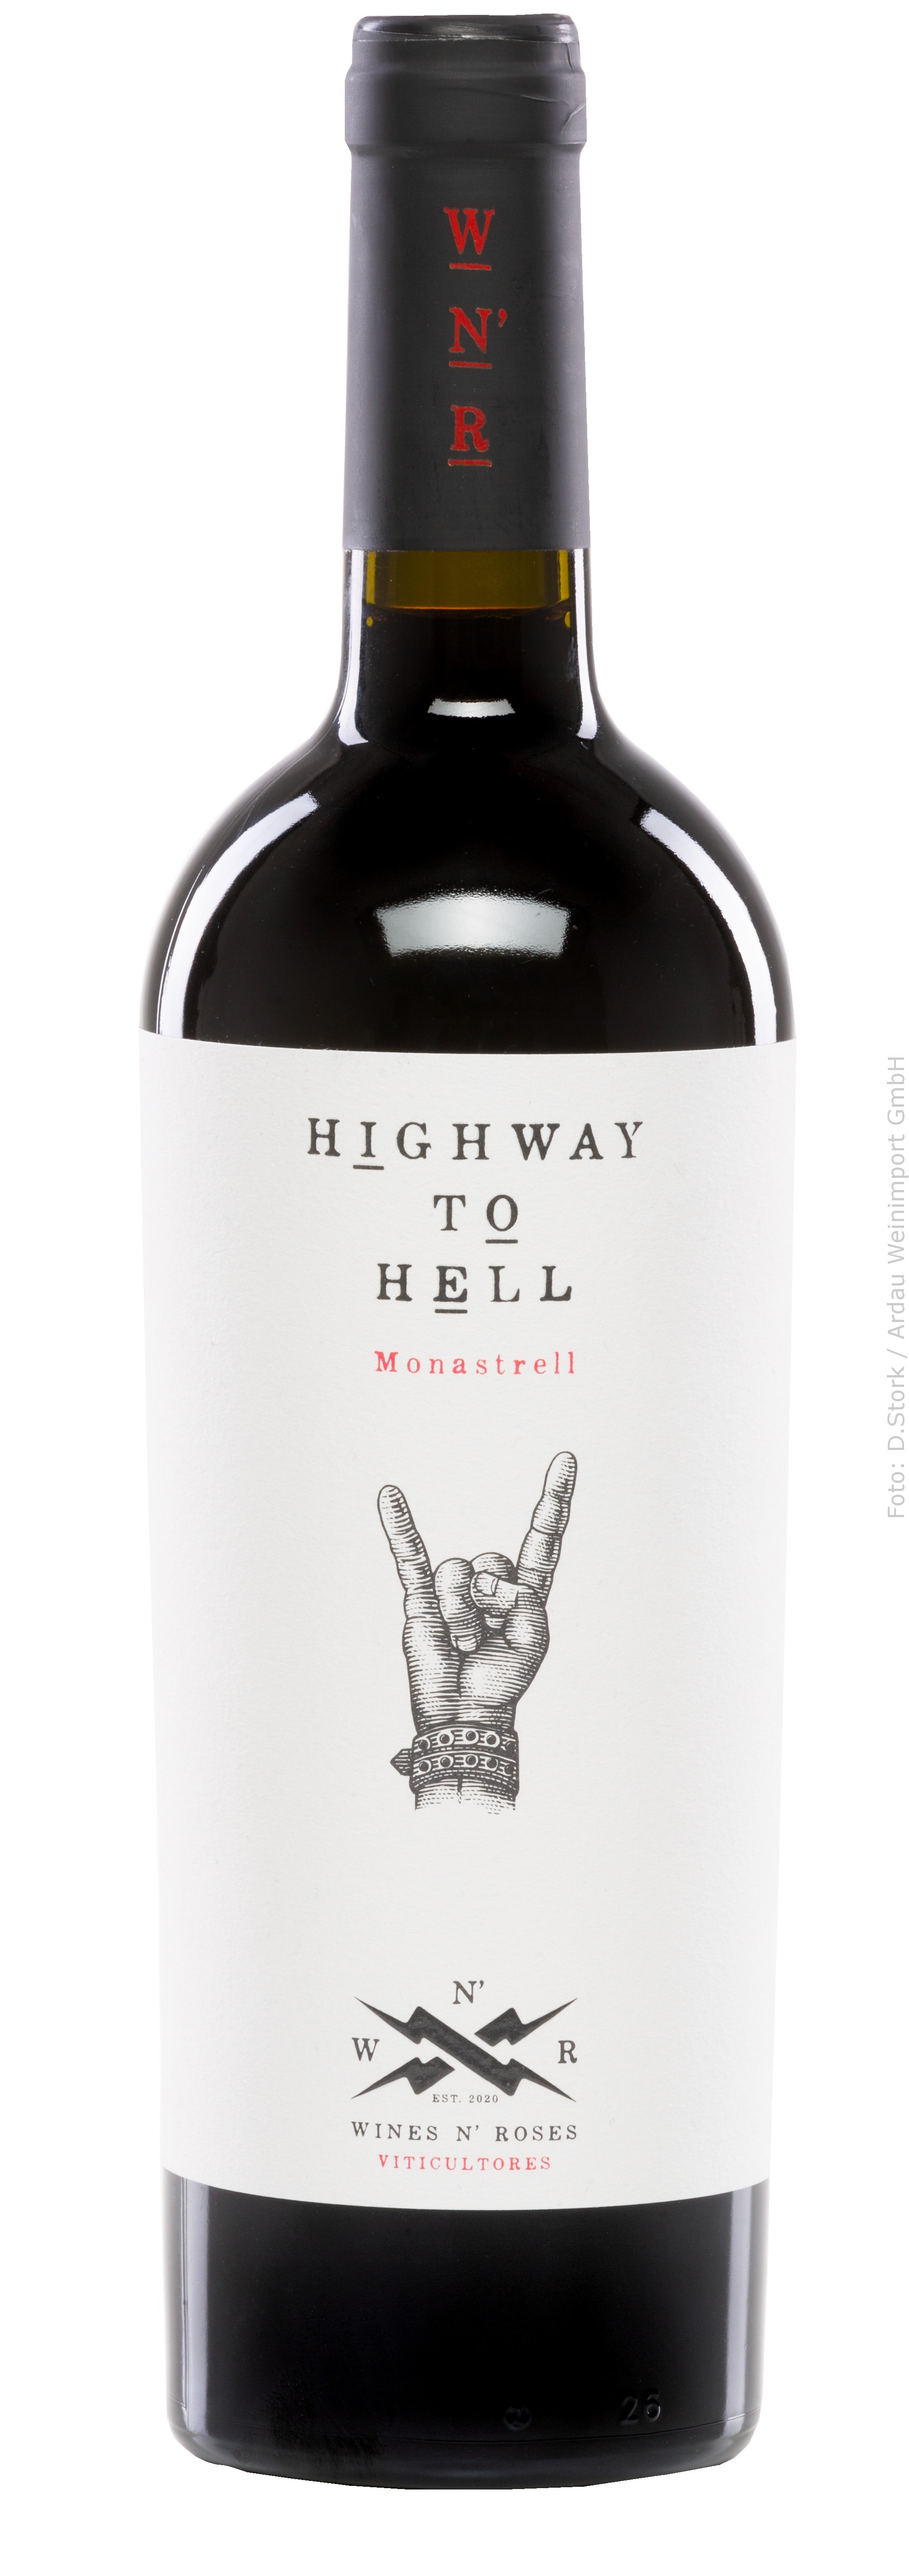 Wines N' Roses Viticultores | Highway to hell